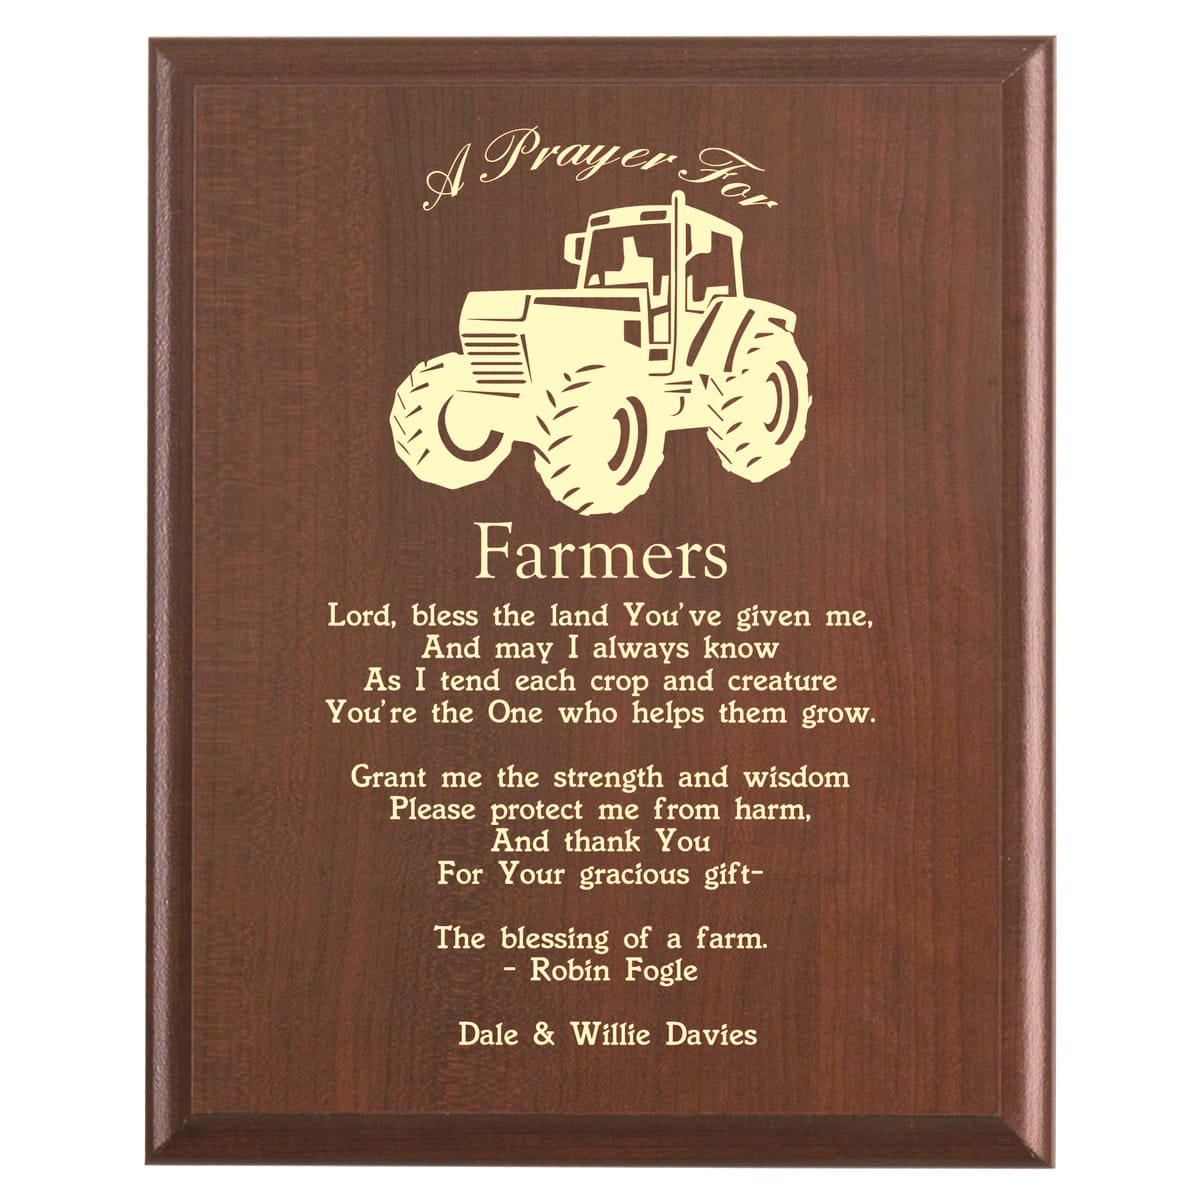 Plaque photo: Farmer's Prayer Plaque design with free personalization. Wood style finish with customized text.